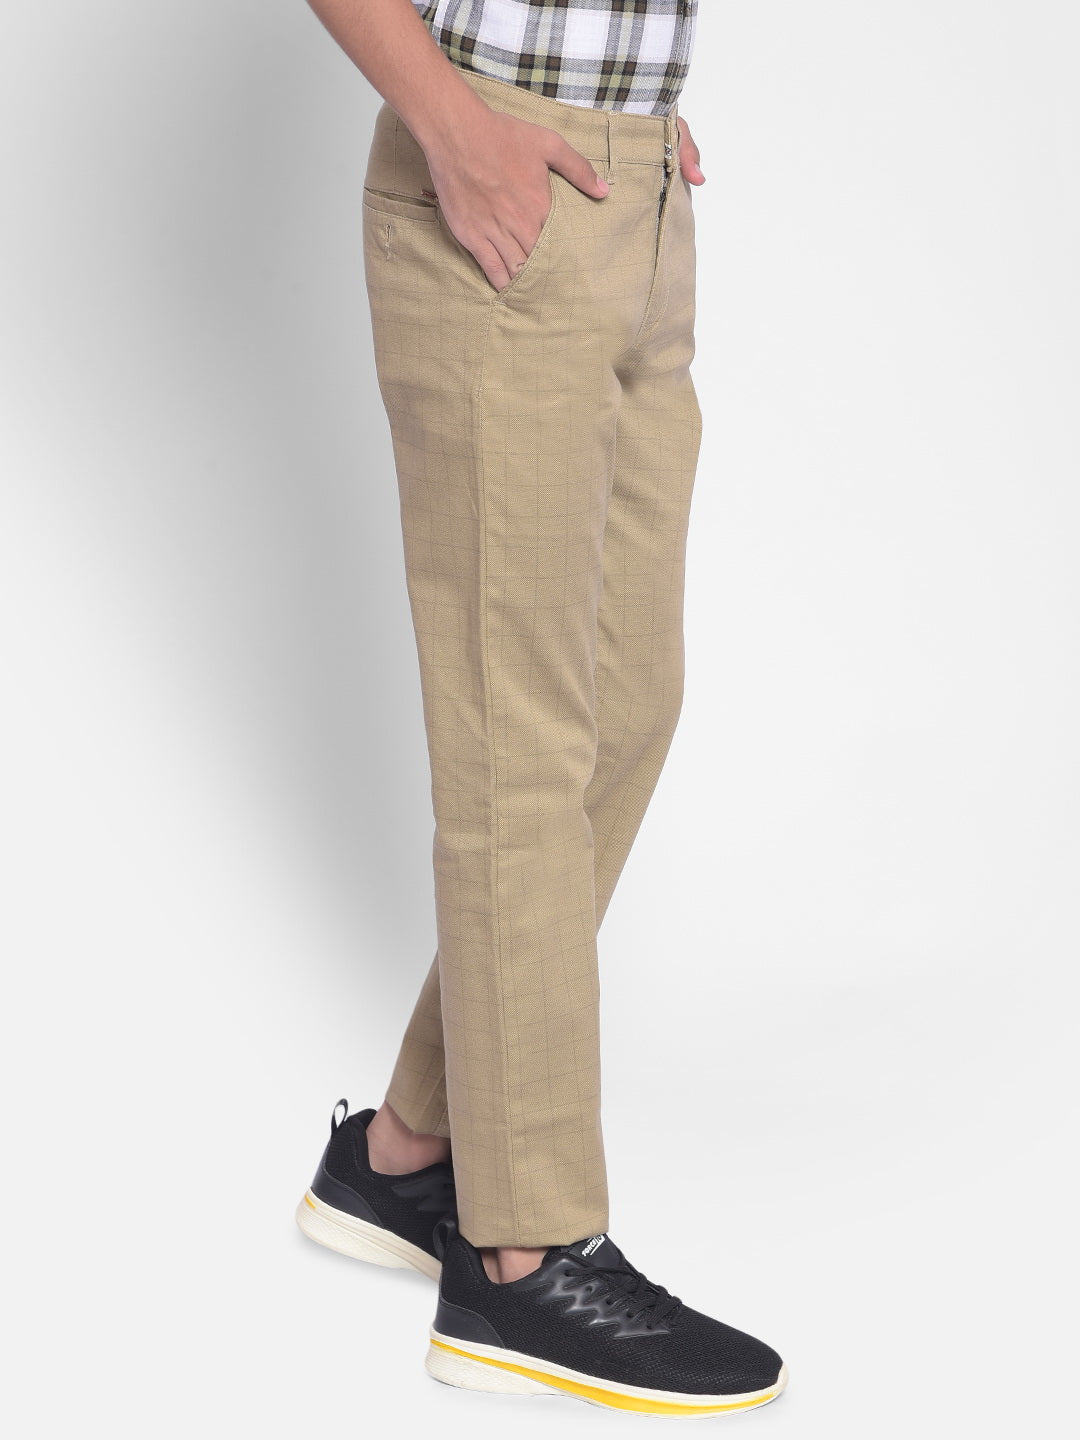 Beige Checked Trousers-Boys Trousers-Crimsoune Club